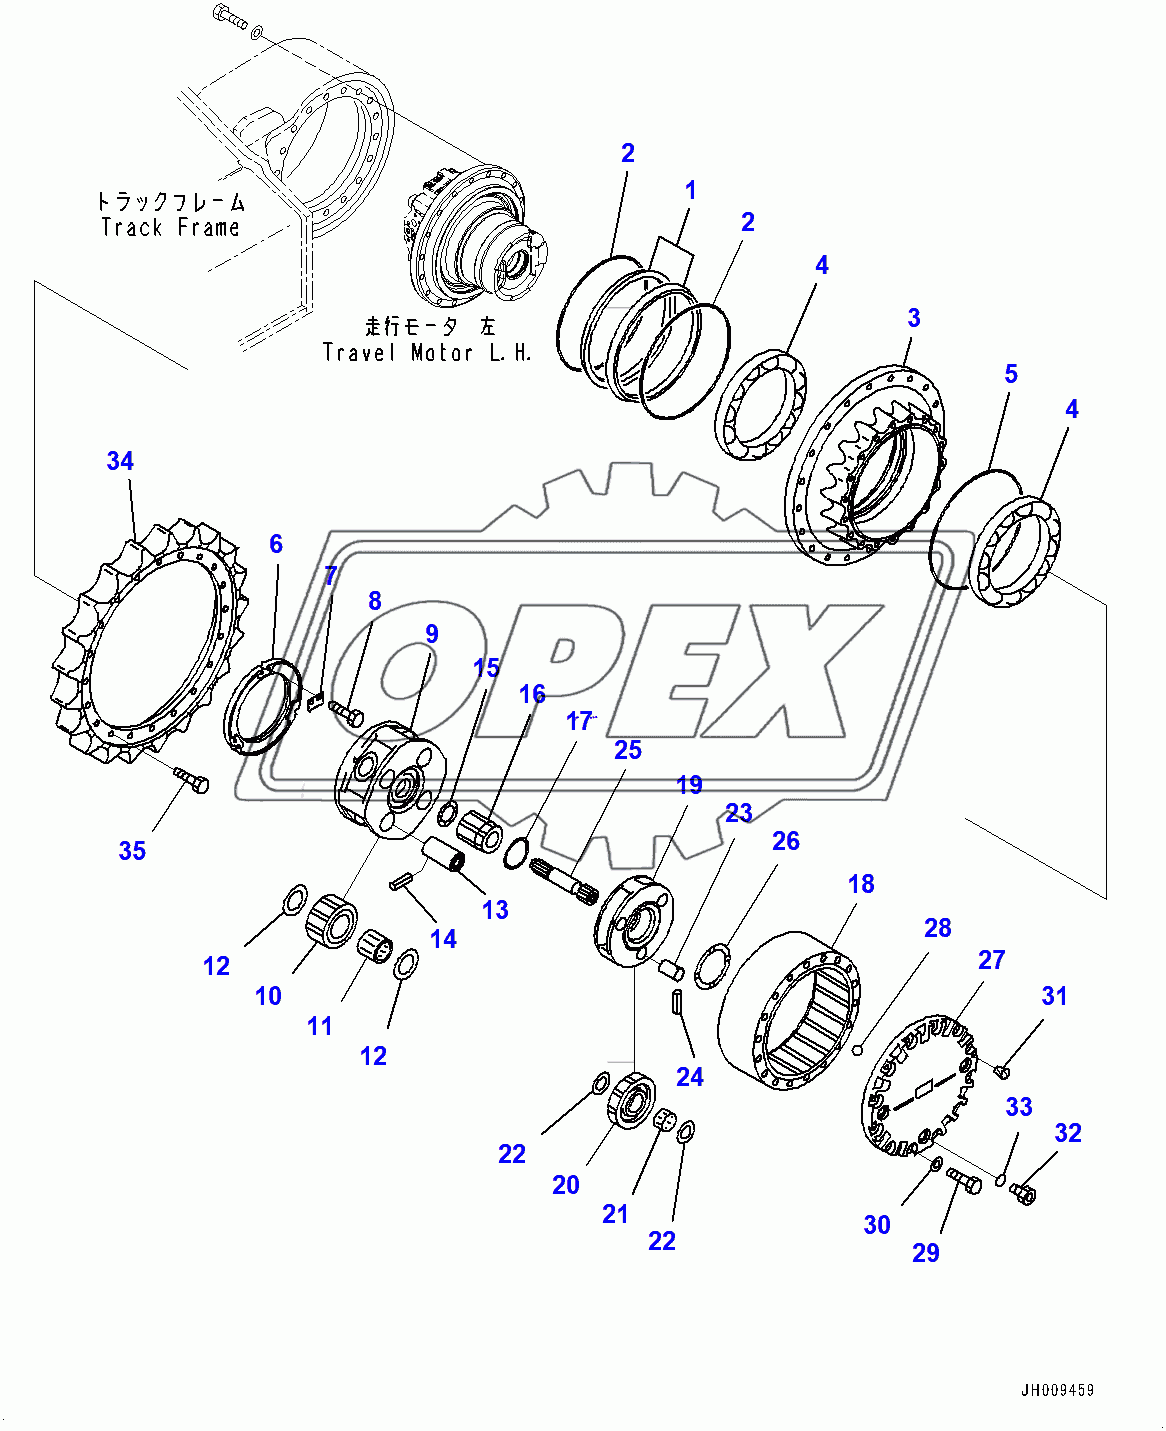  Travel Motor and Final Drive, Final Drive L.H. (400127-)